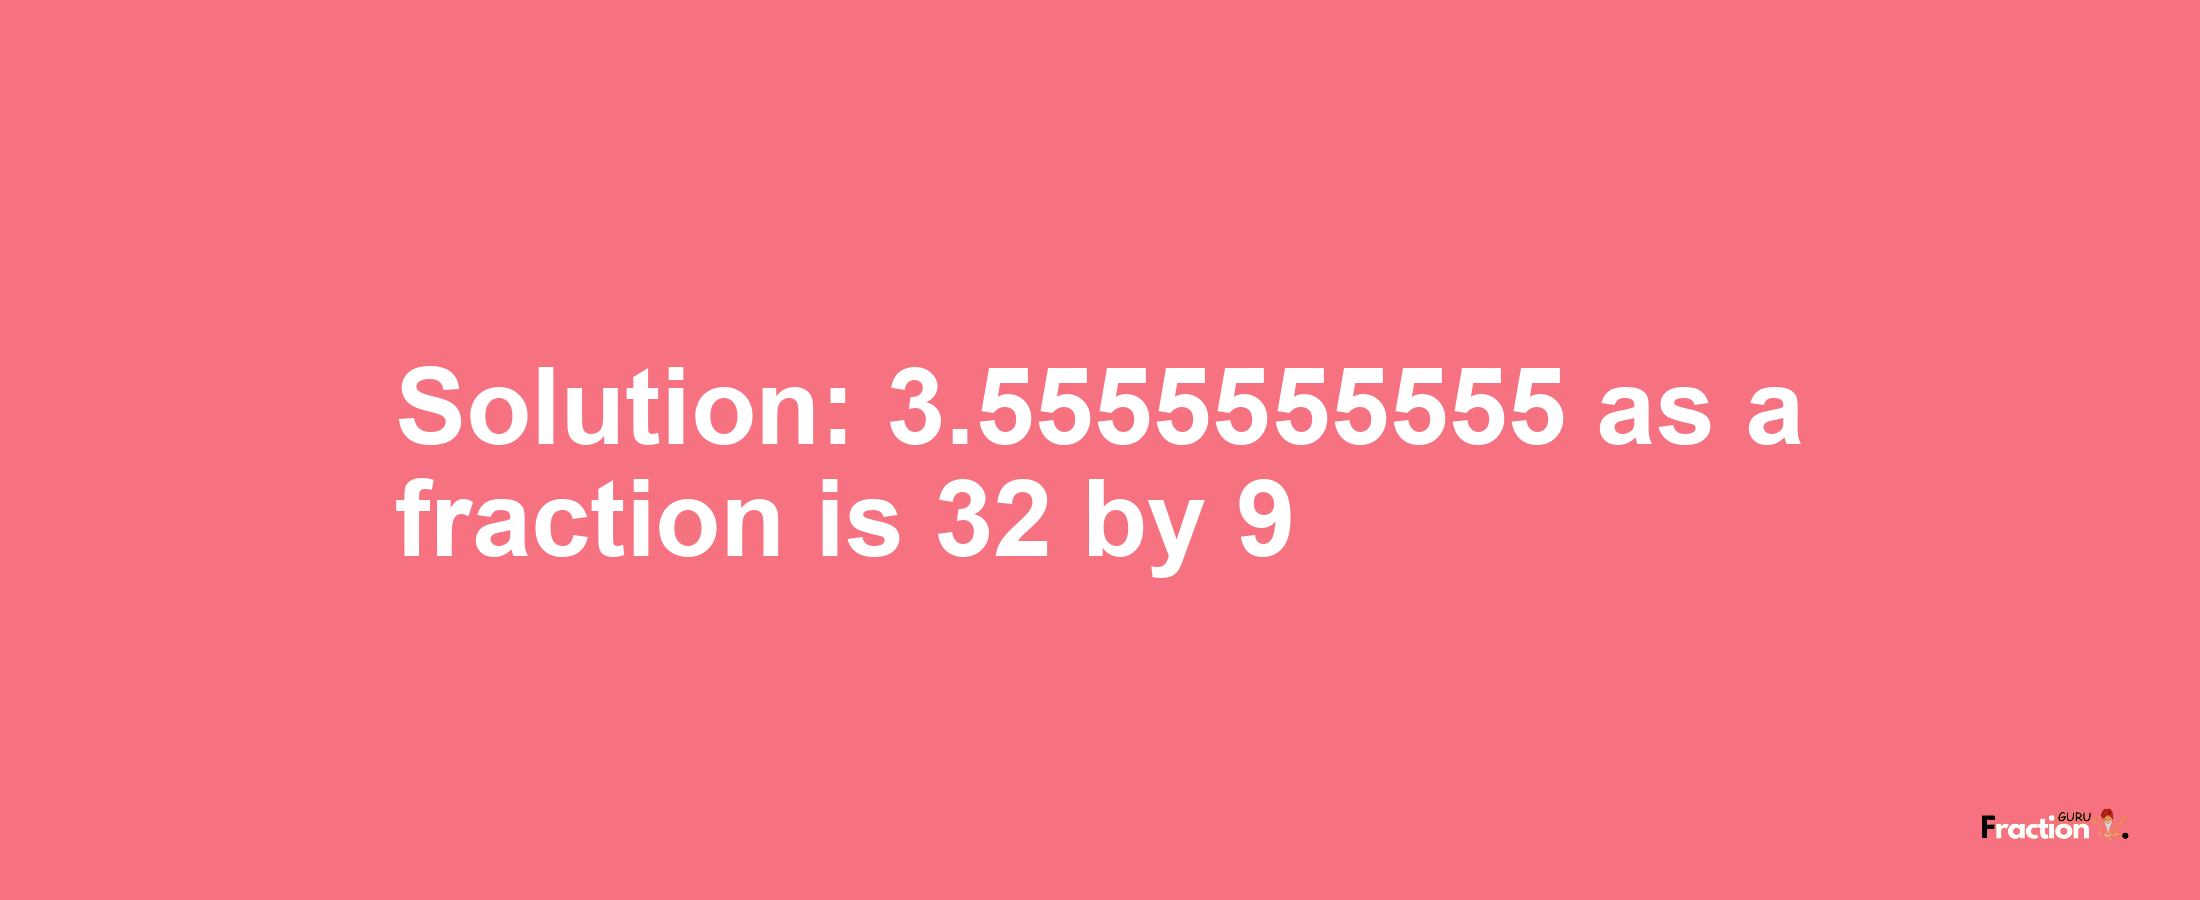 Solution:3.5555555555 as a fraction is 32/9